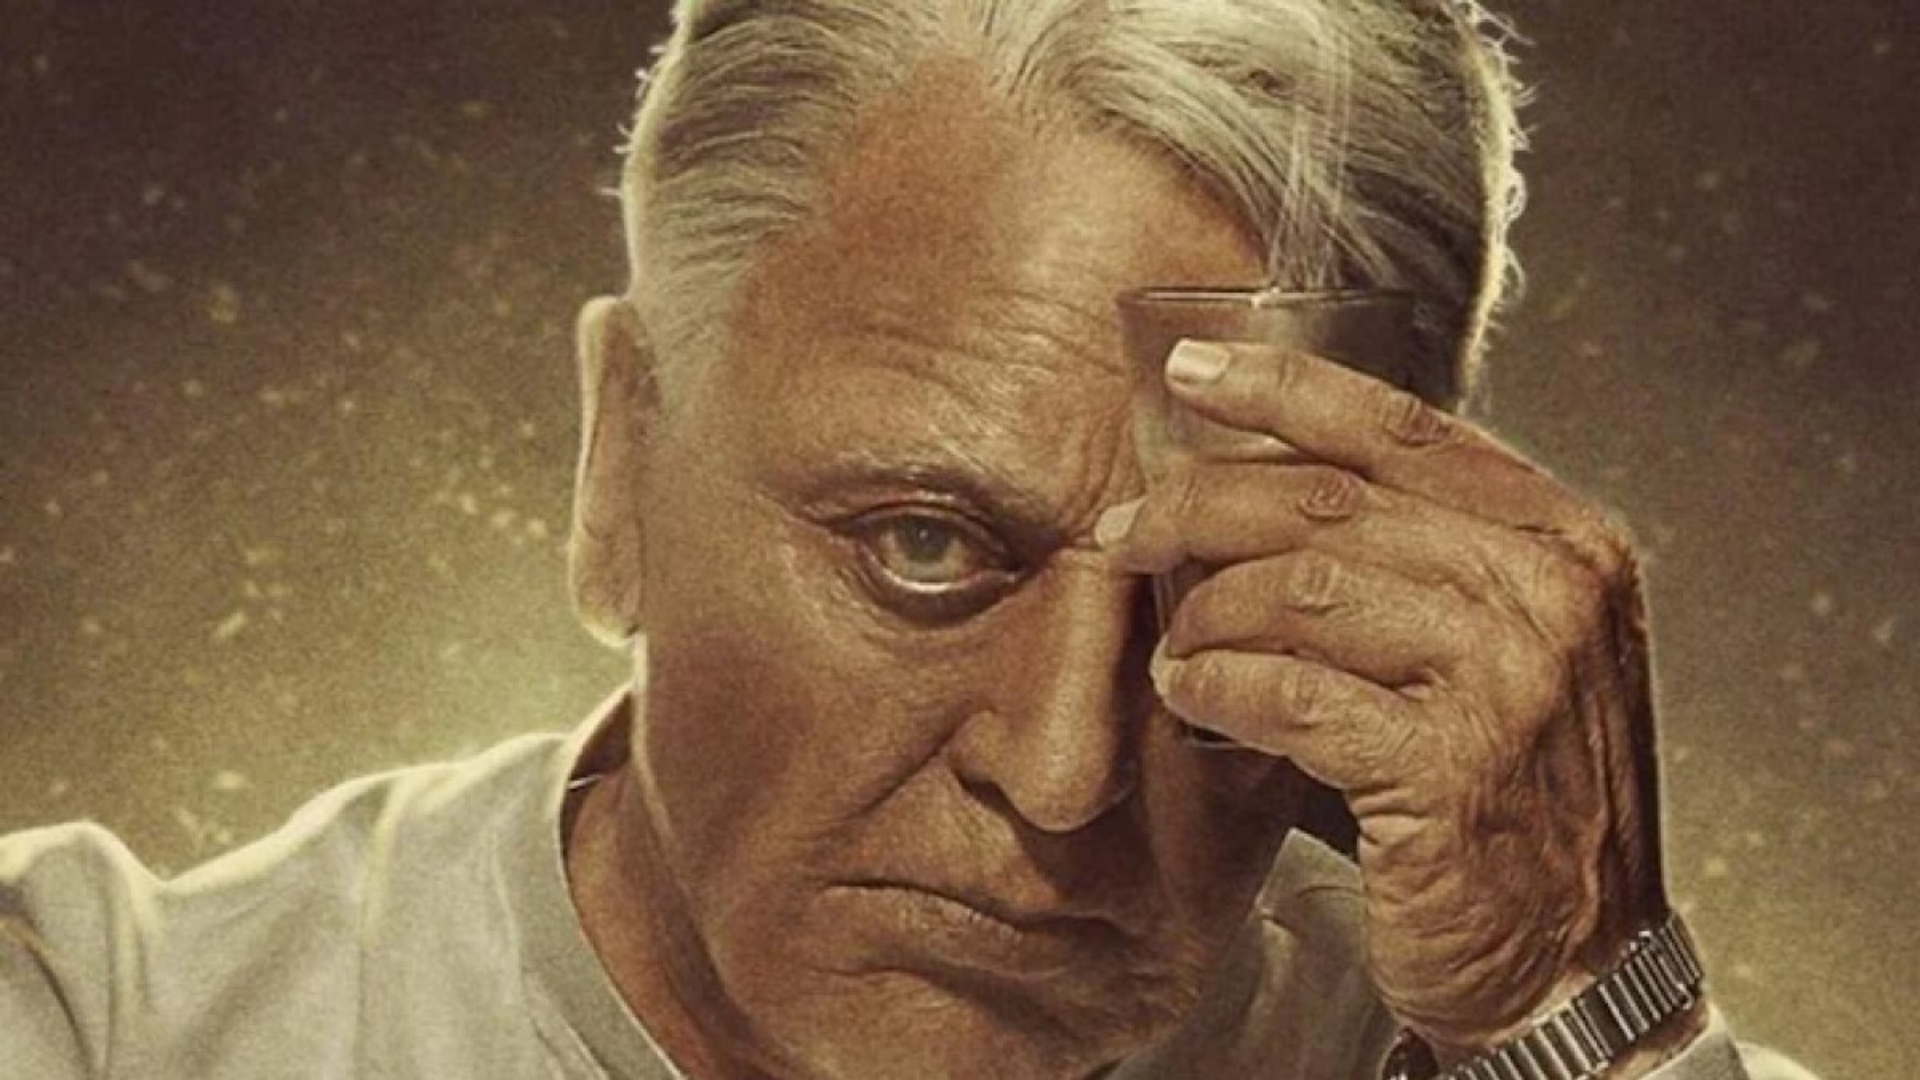 It’s Official! Kamal Haasan’s ‘Indian 2’ to Release in July